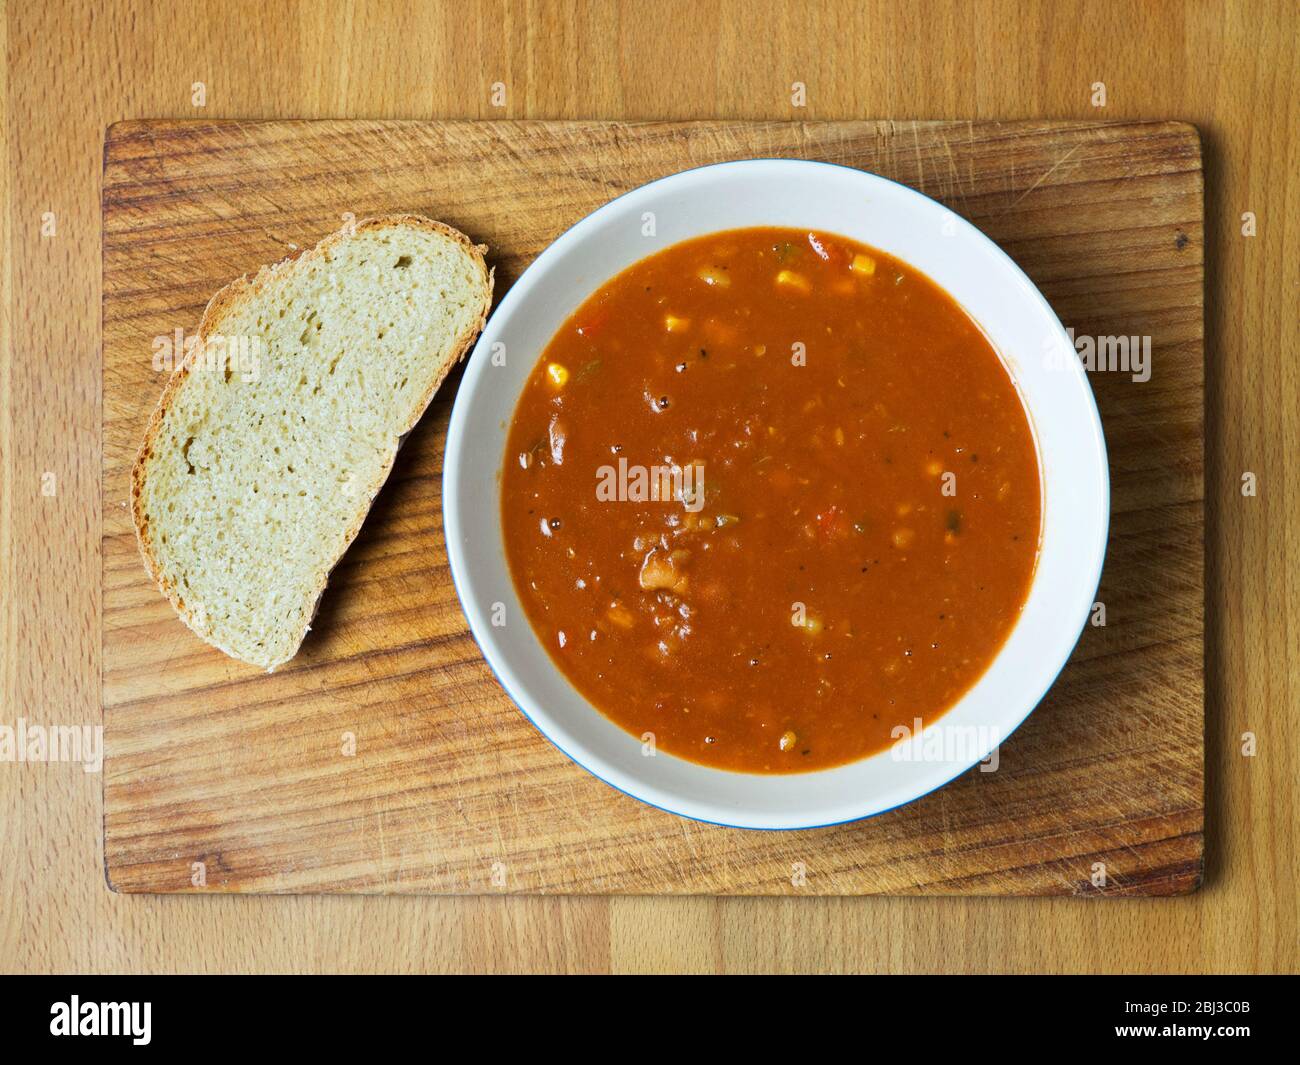 A bowl of three bean soup with a slice of homemade oat bread on a wooden bread board Stock Photo